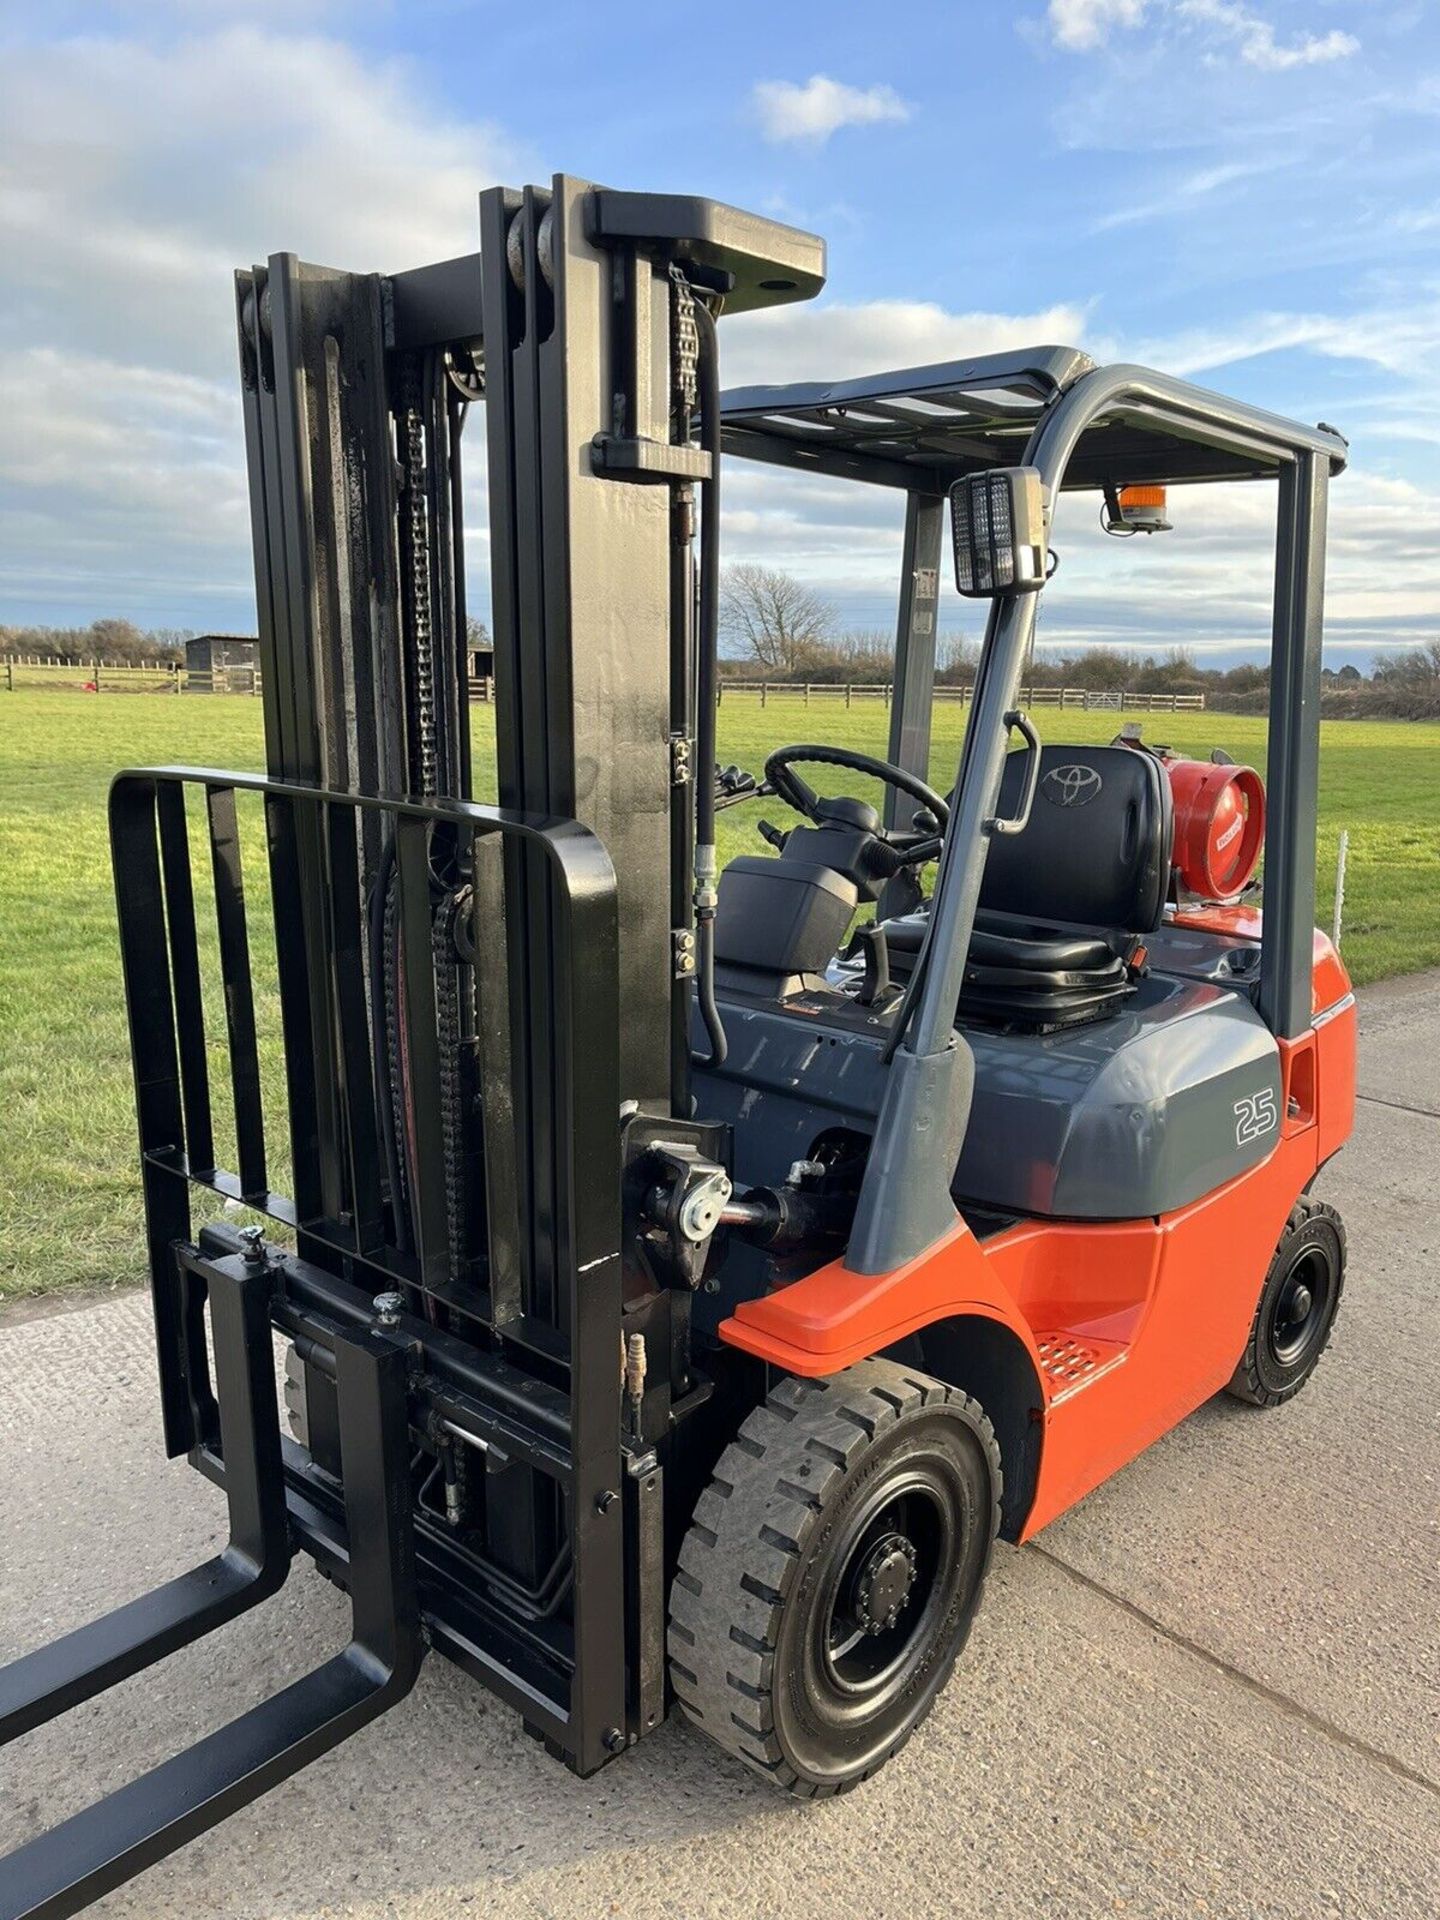 Toyota forklift truck - Image 4 of 5